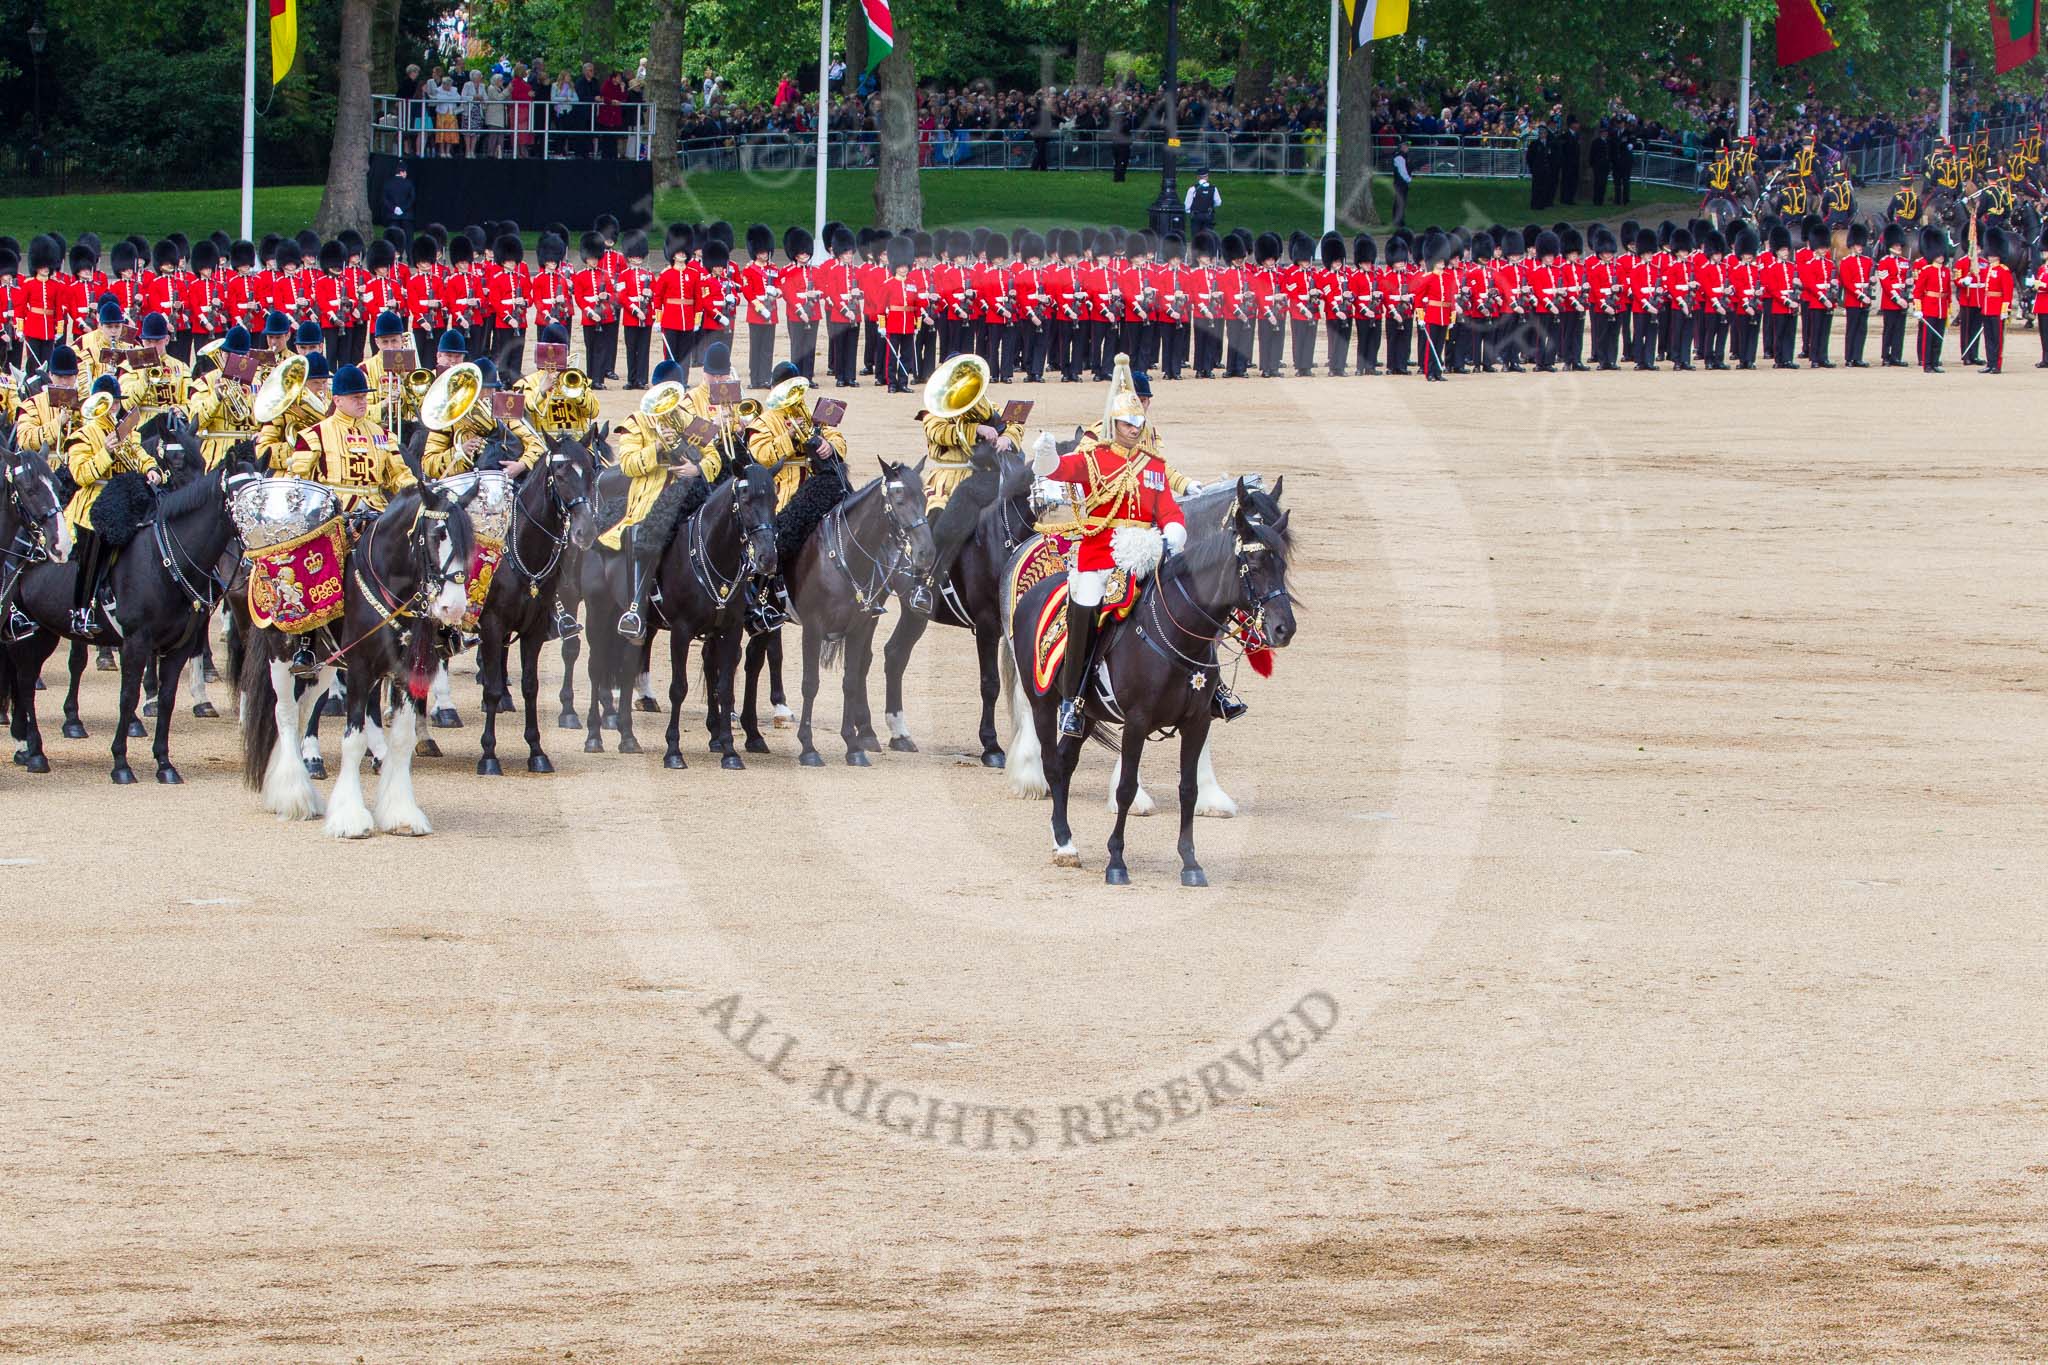 Trooping the Colour 2013: The Mounted Bands of the Household Cavalry are ready to leave, the Royal Horse Artillery can be seen on the top-right of the photos, ready to march off. Image #740, 15 June 2013 12:00 Horse Guards Parade, London, UK